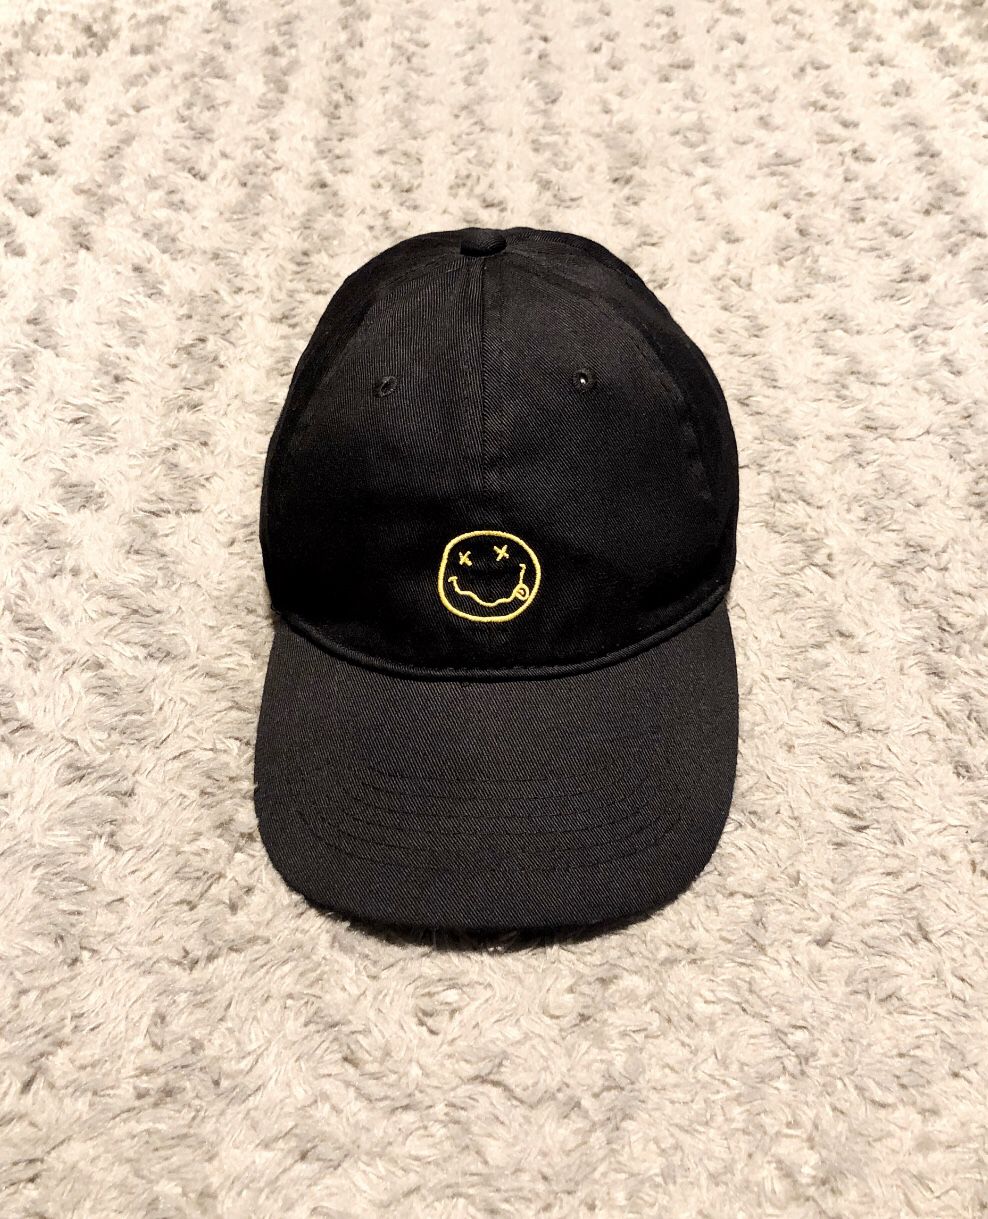 Nirvana classic logo cap Like new! Great condition no rips, tears, or stains. Color black with iconic logo front and name on back.